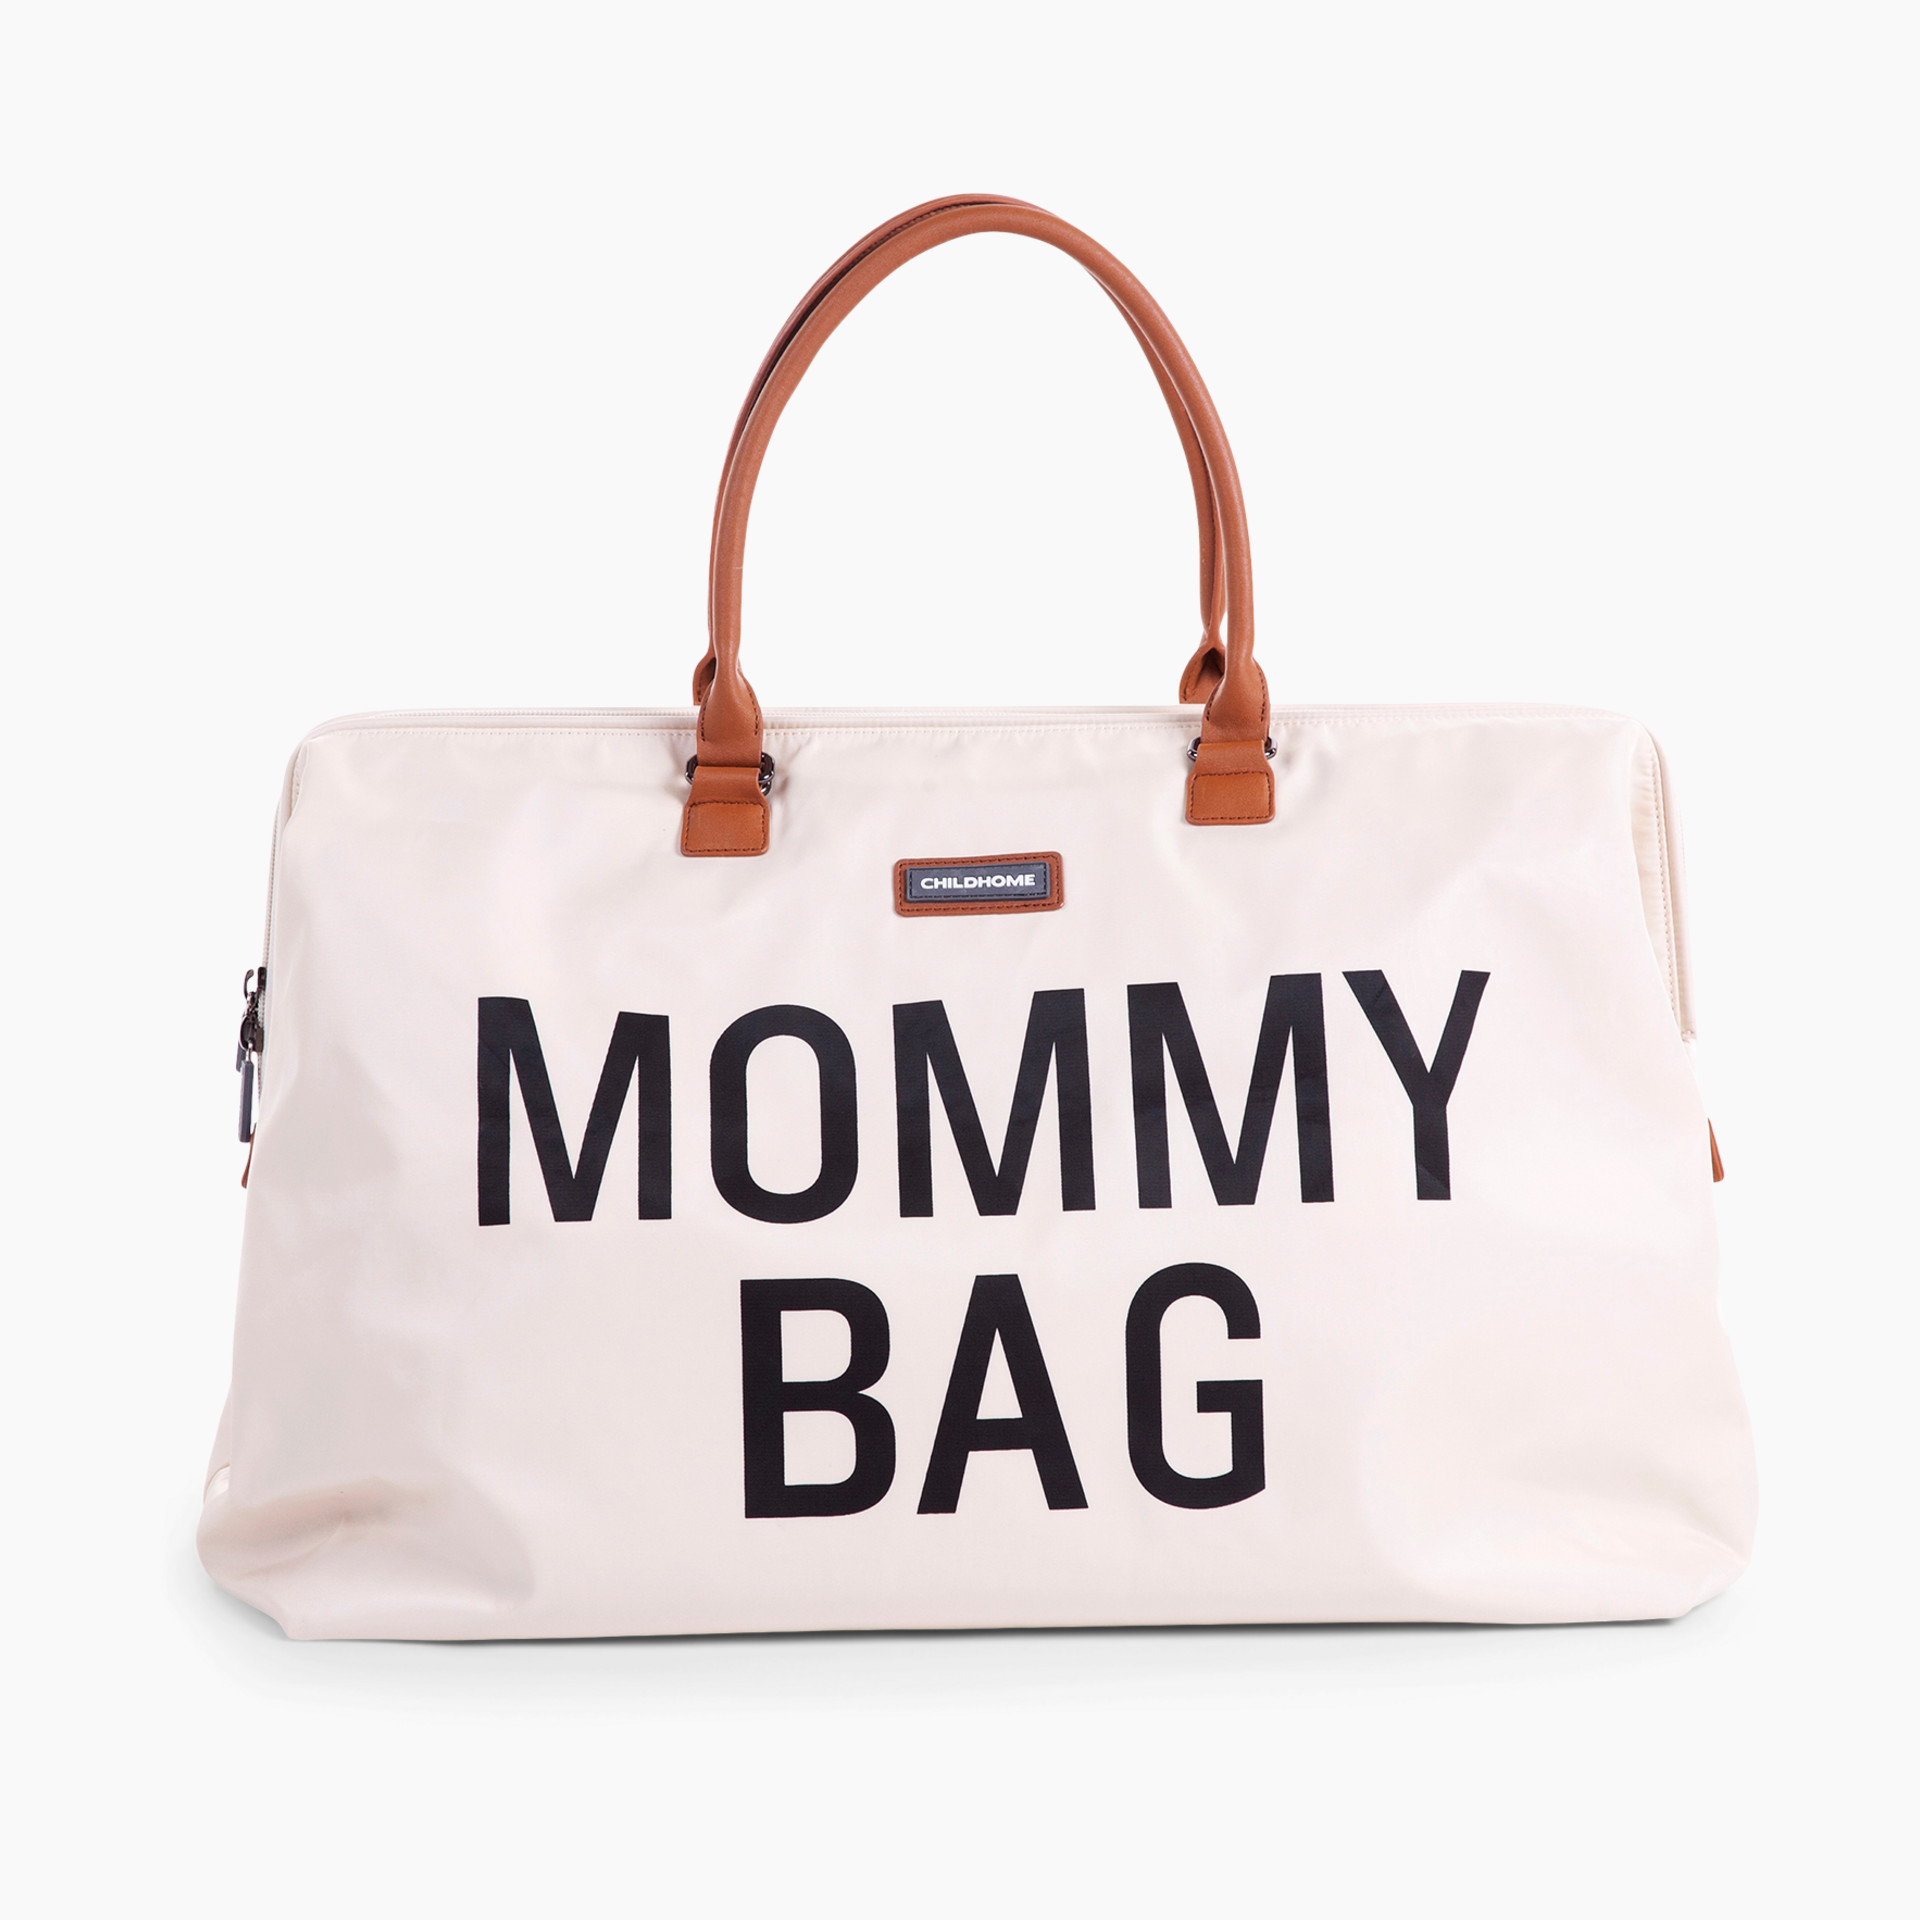 CHILDHOME Mommy Bag black baby changing bag, gold letters